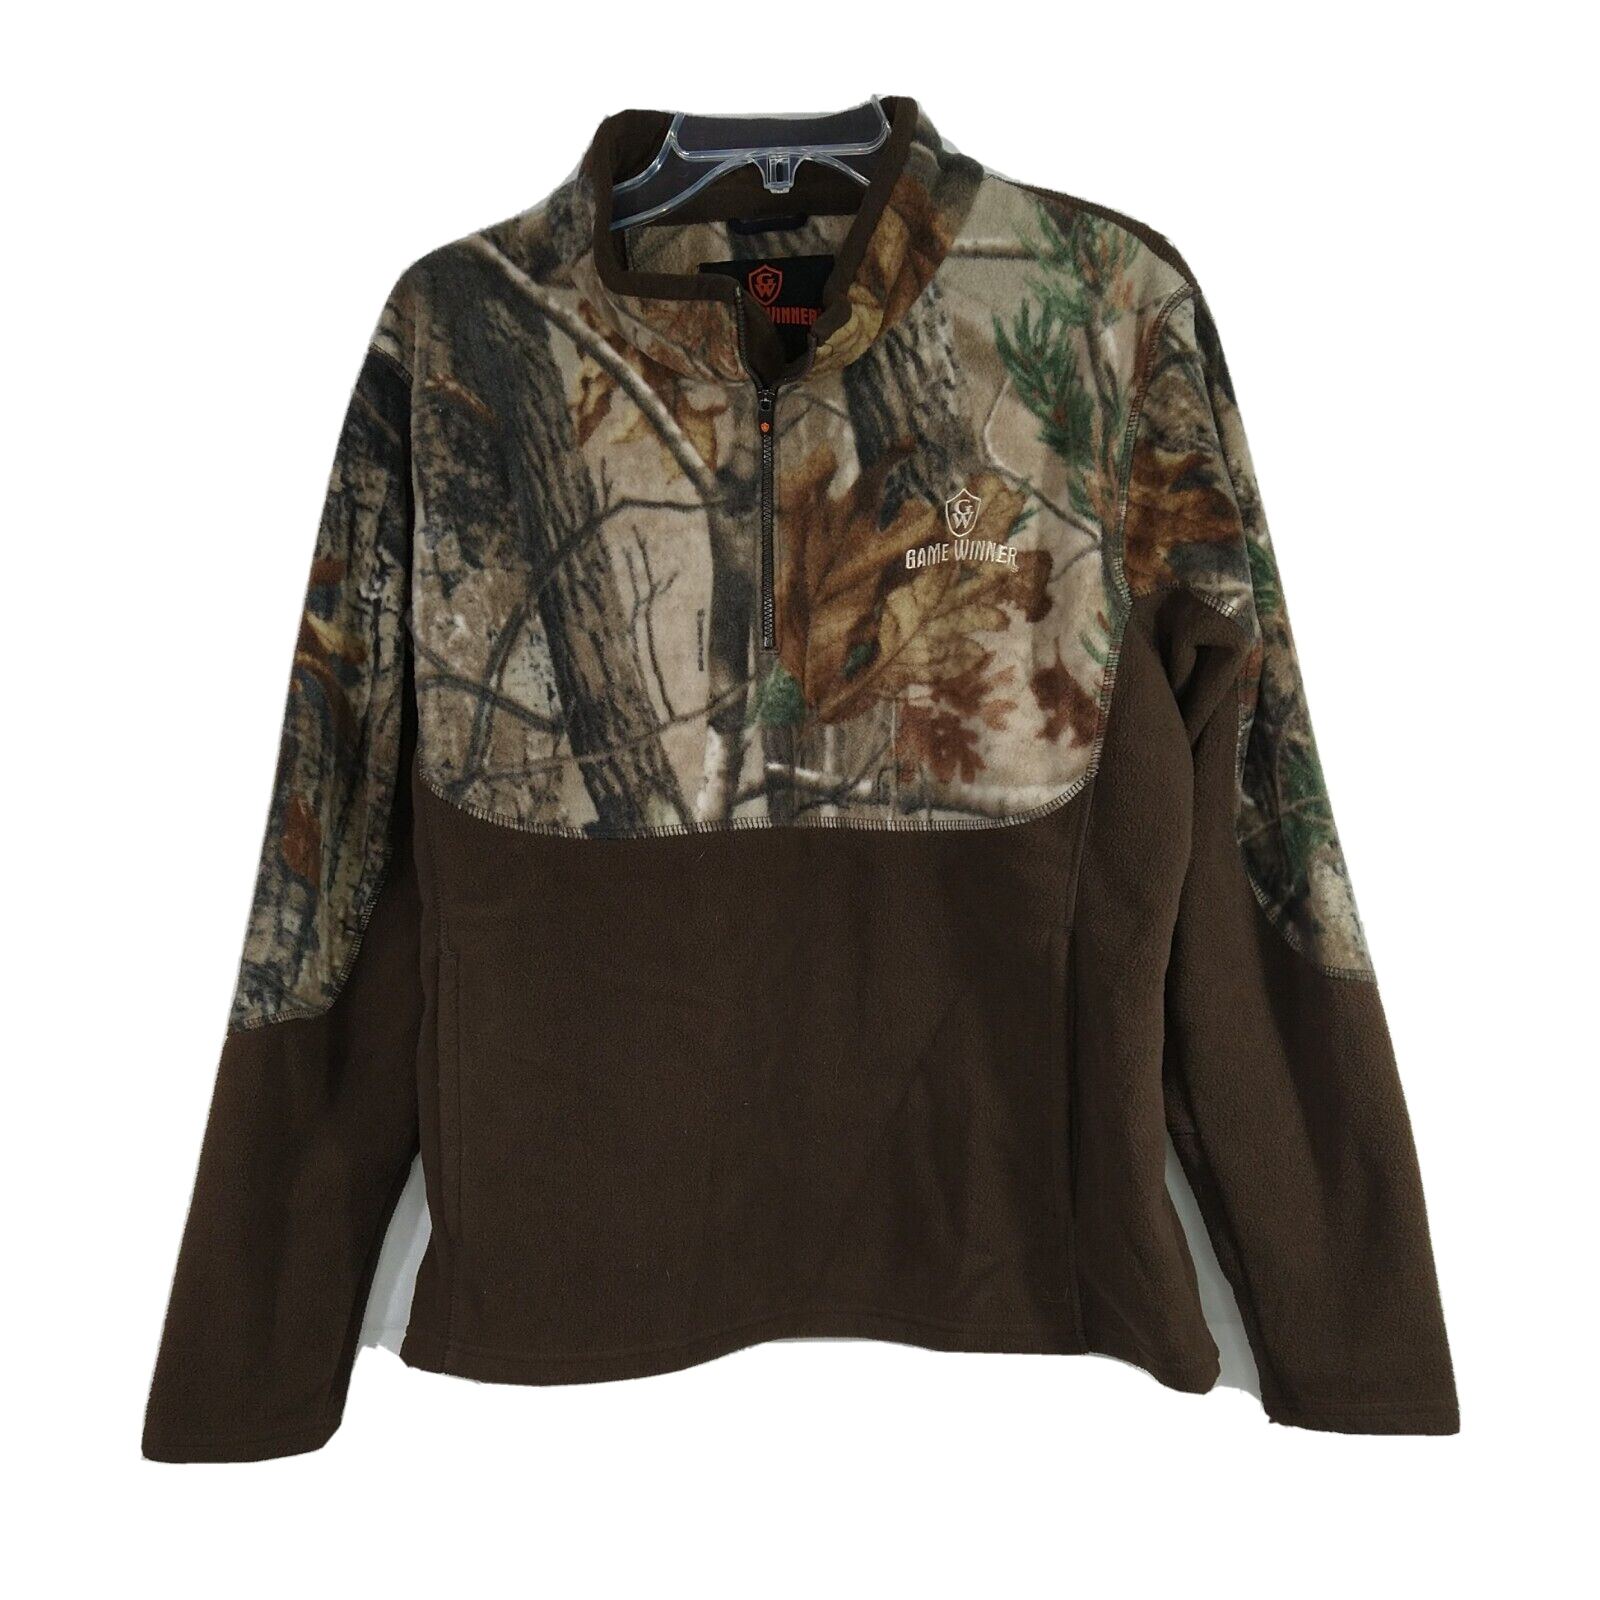 Game Winner Camo Jacket Youth Boys Girls Size XL Brown Camoufl...